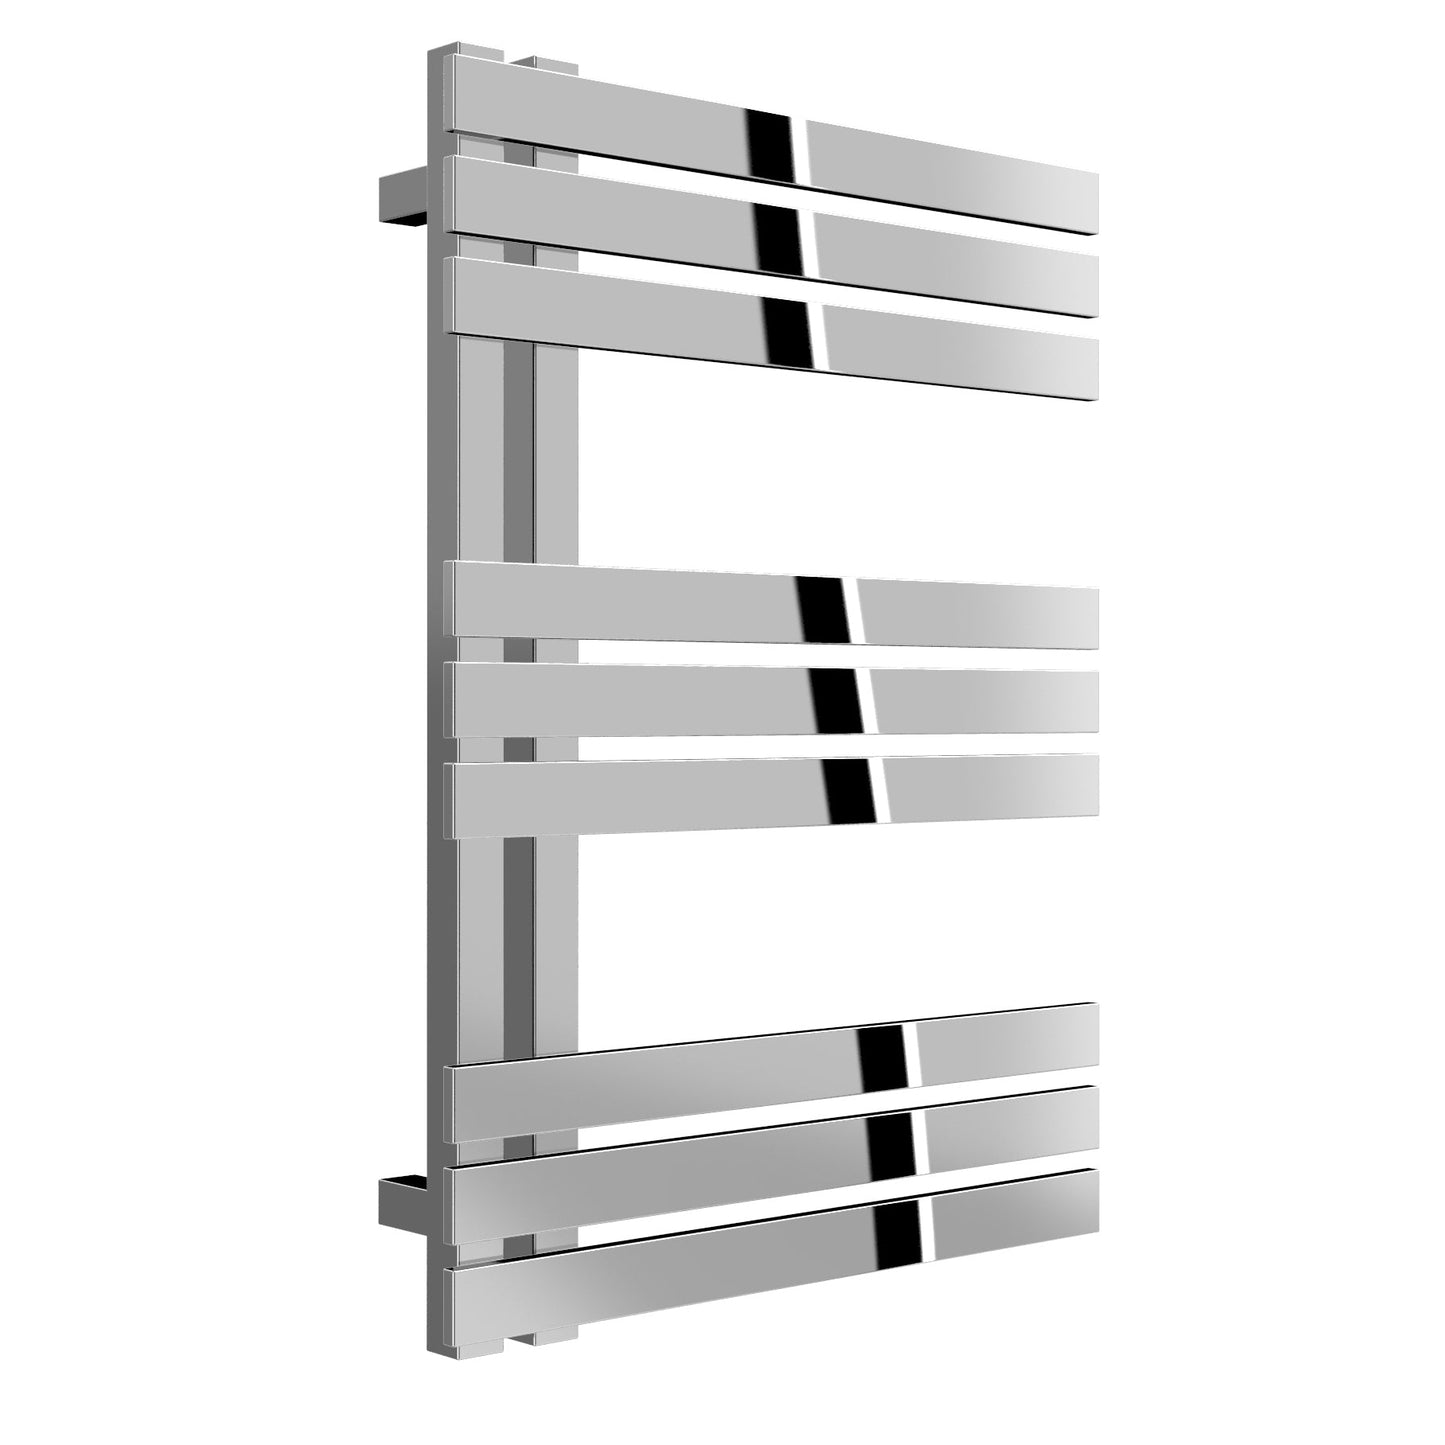 Lovere Dual Fuel Stainless Steel Heated Towel Rail - Various Sizes - Polished Stainless Steel